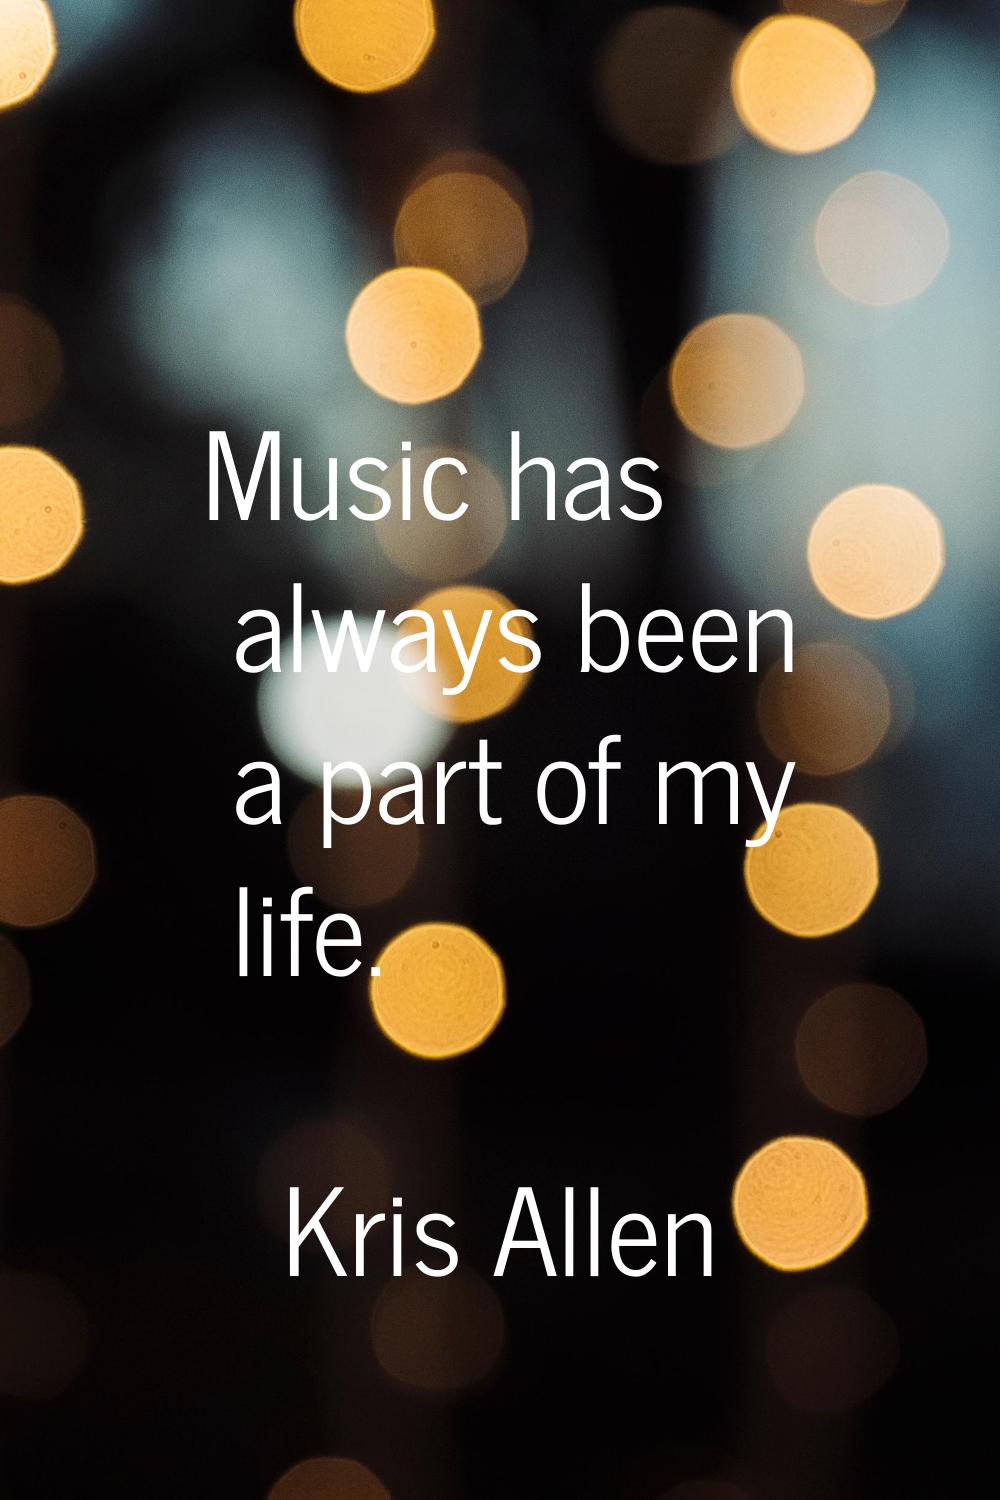 Music has always been a part of my life.